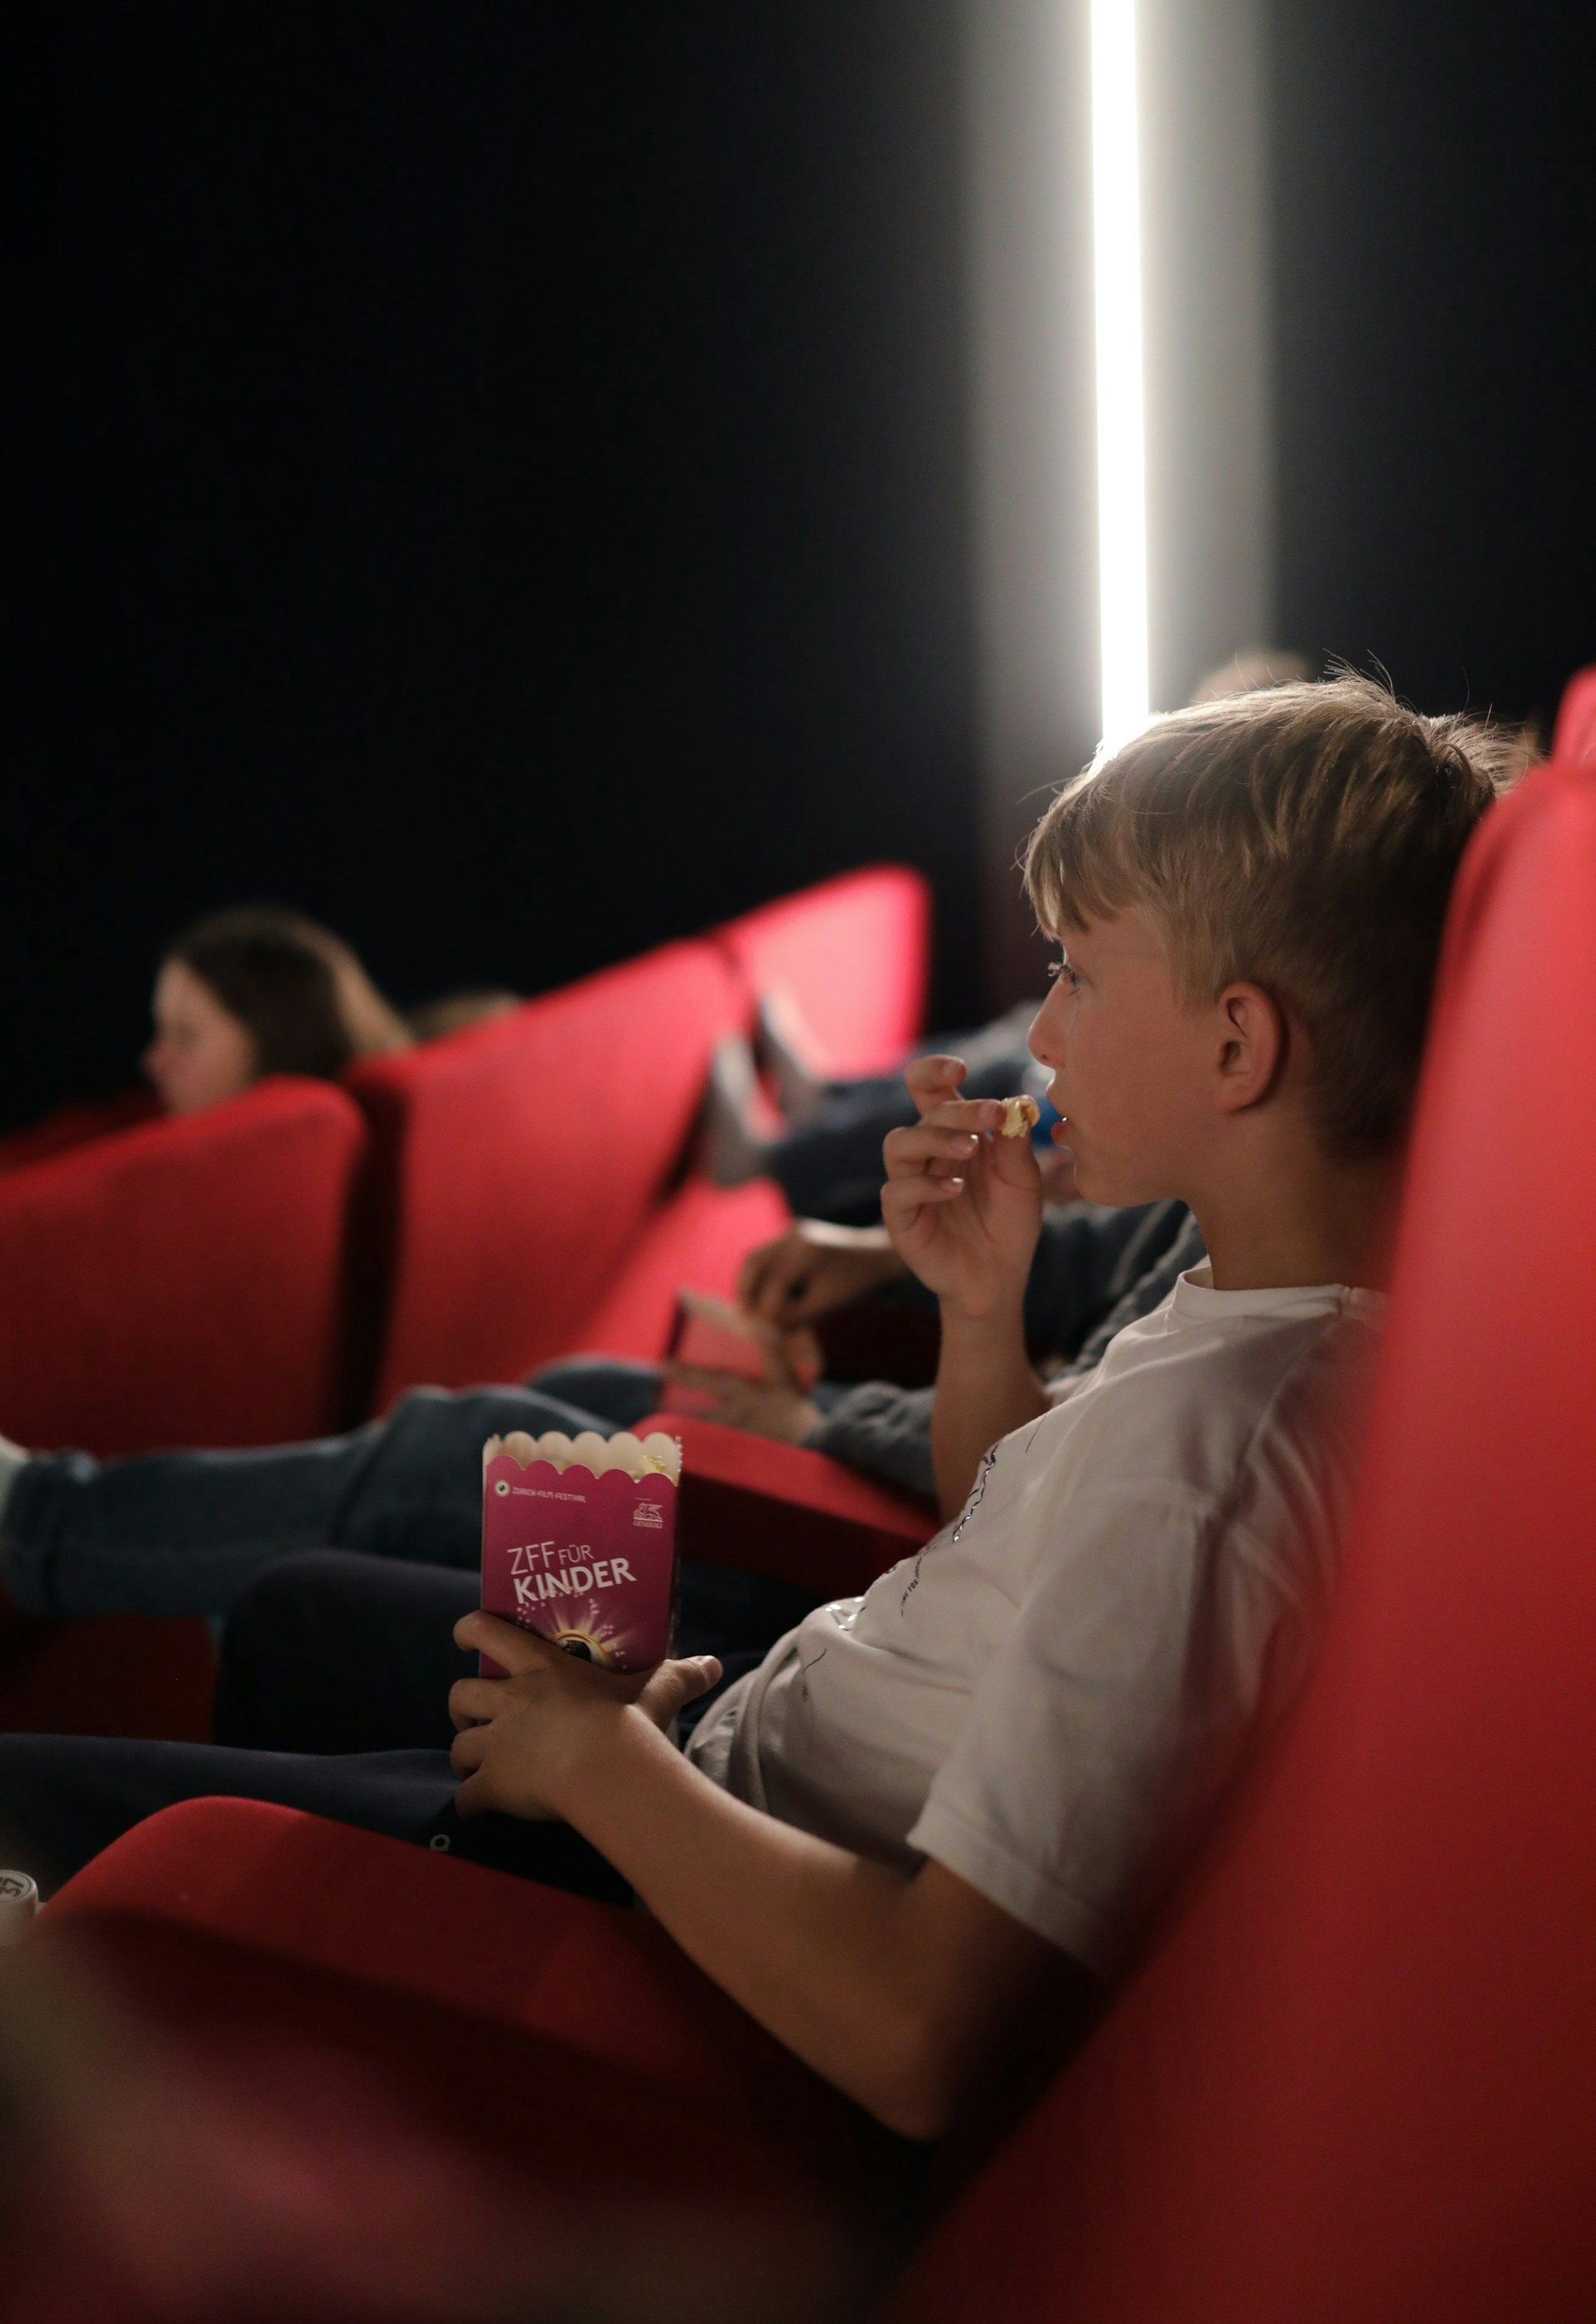 Children in a cinema auditorium. They are eating popcorns.